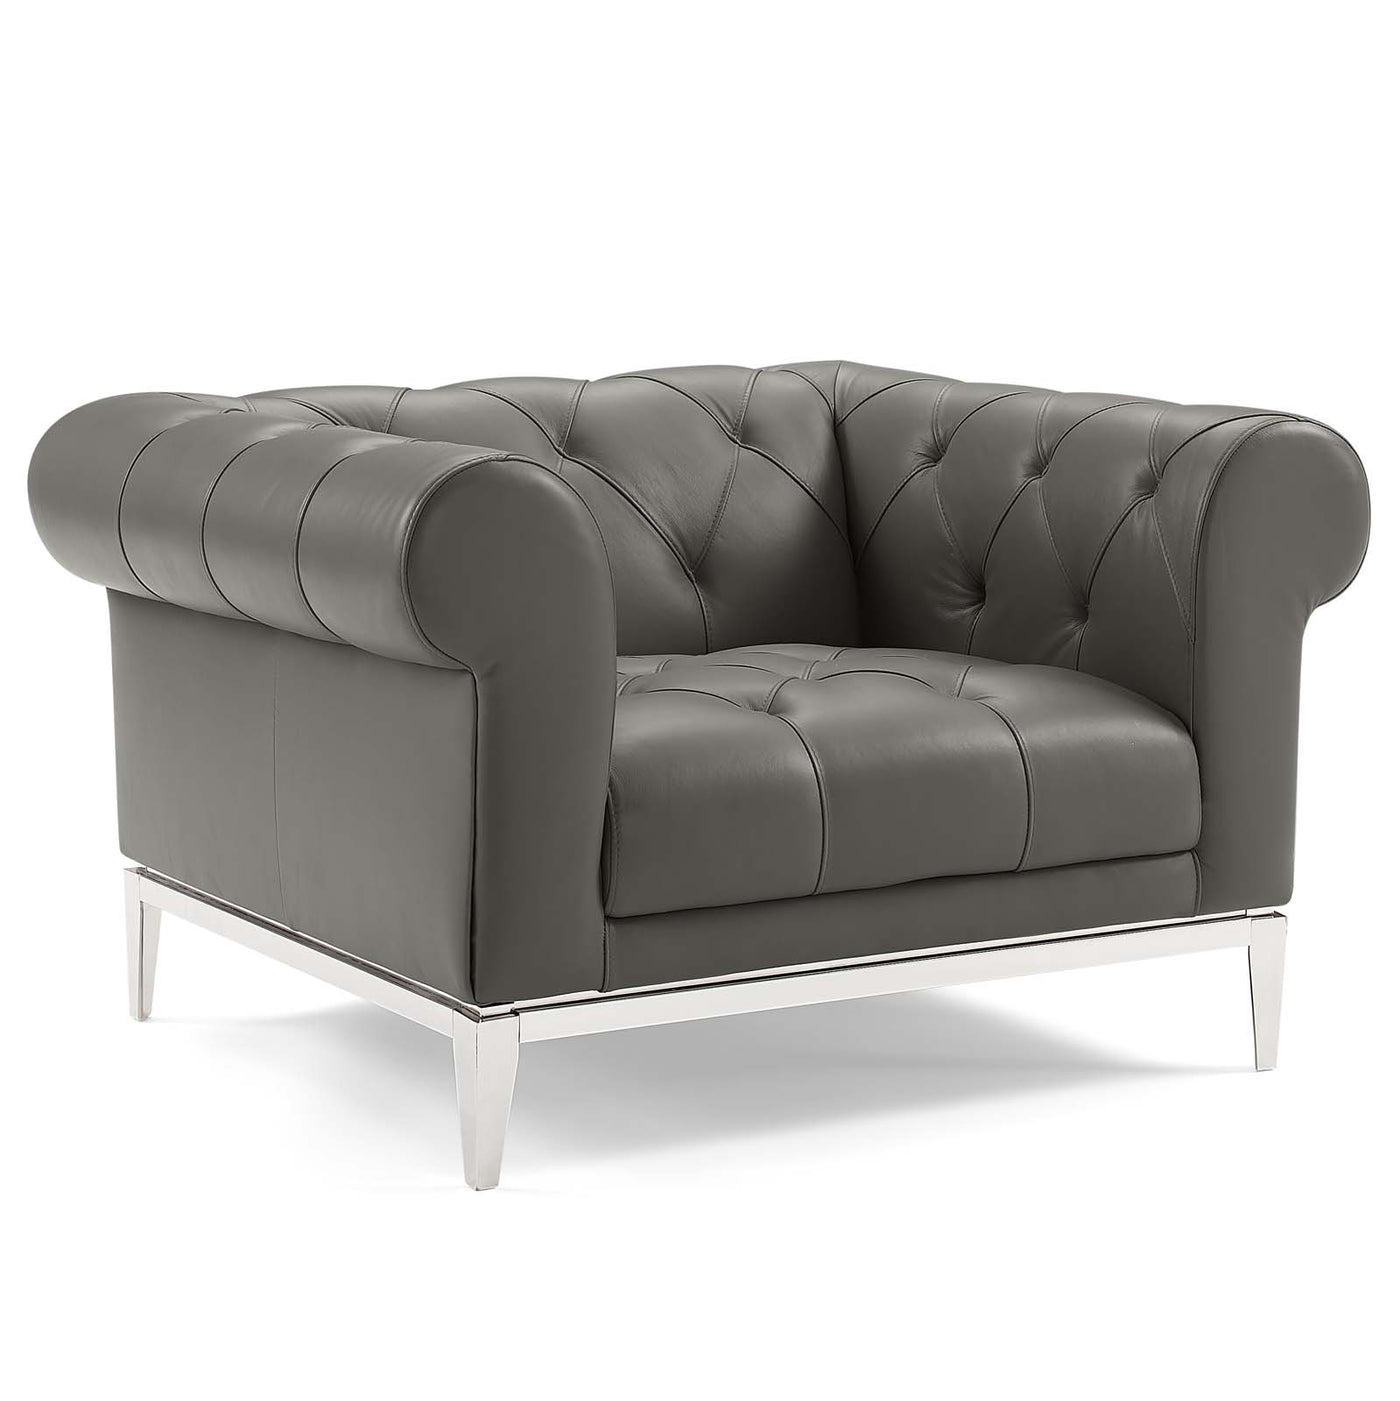 Idyll Tufted Button Upholstered Leather Chesterfield Armchair